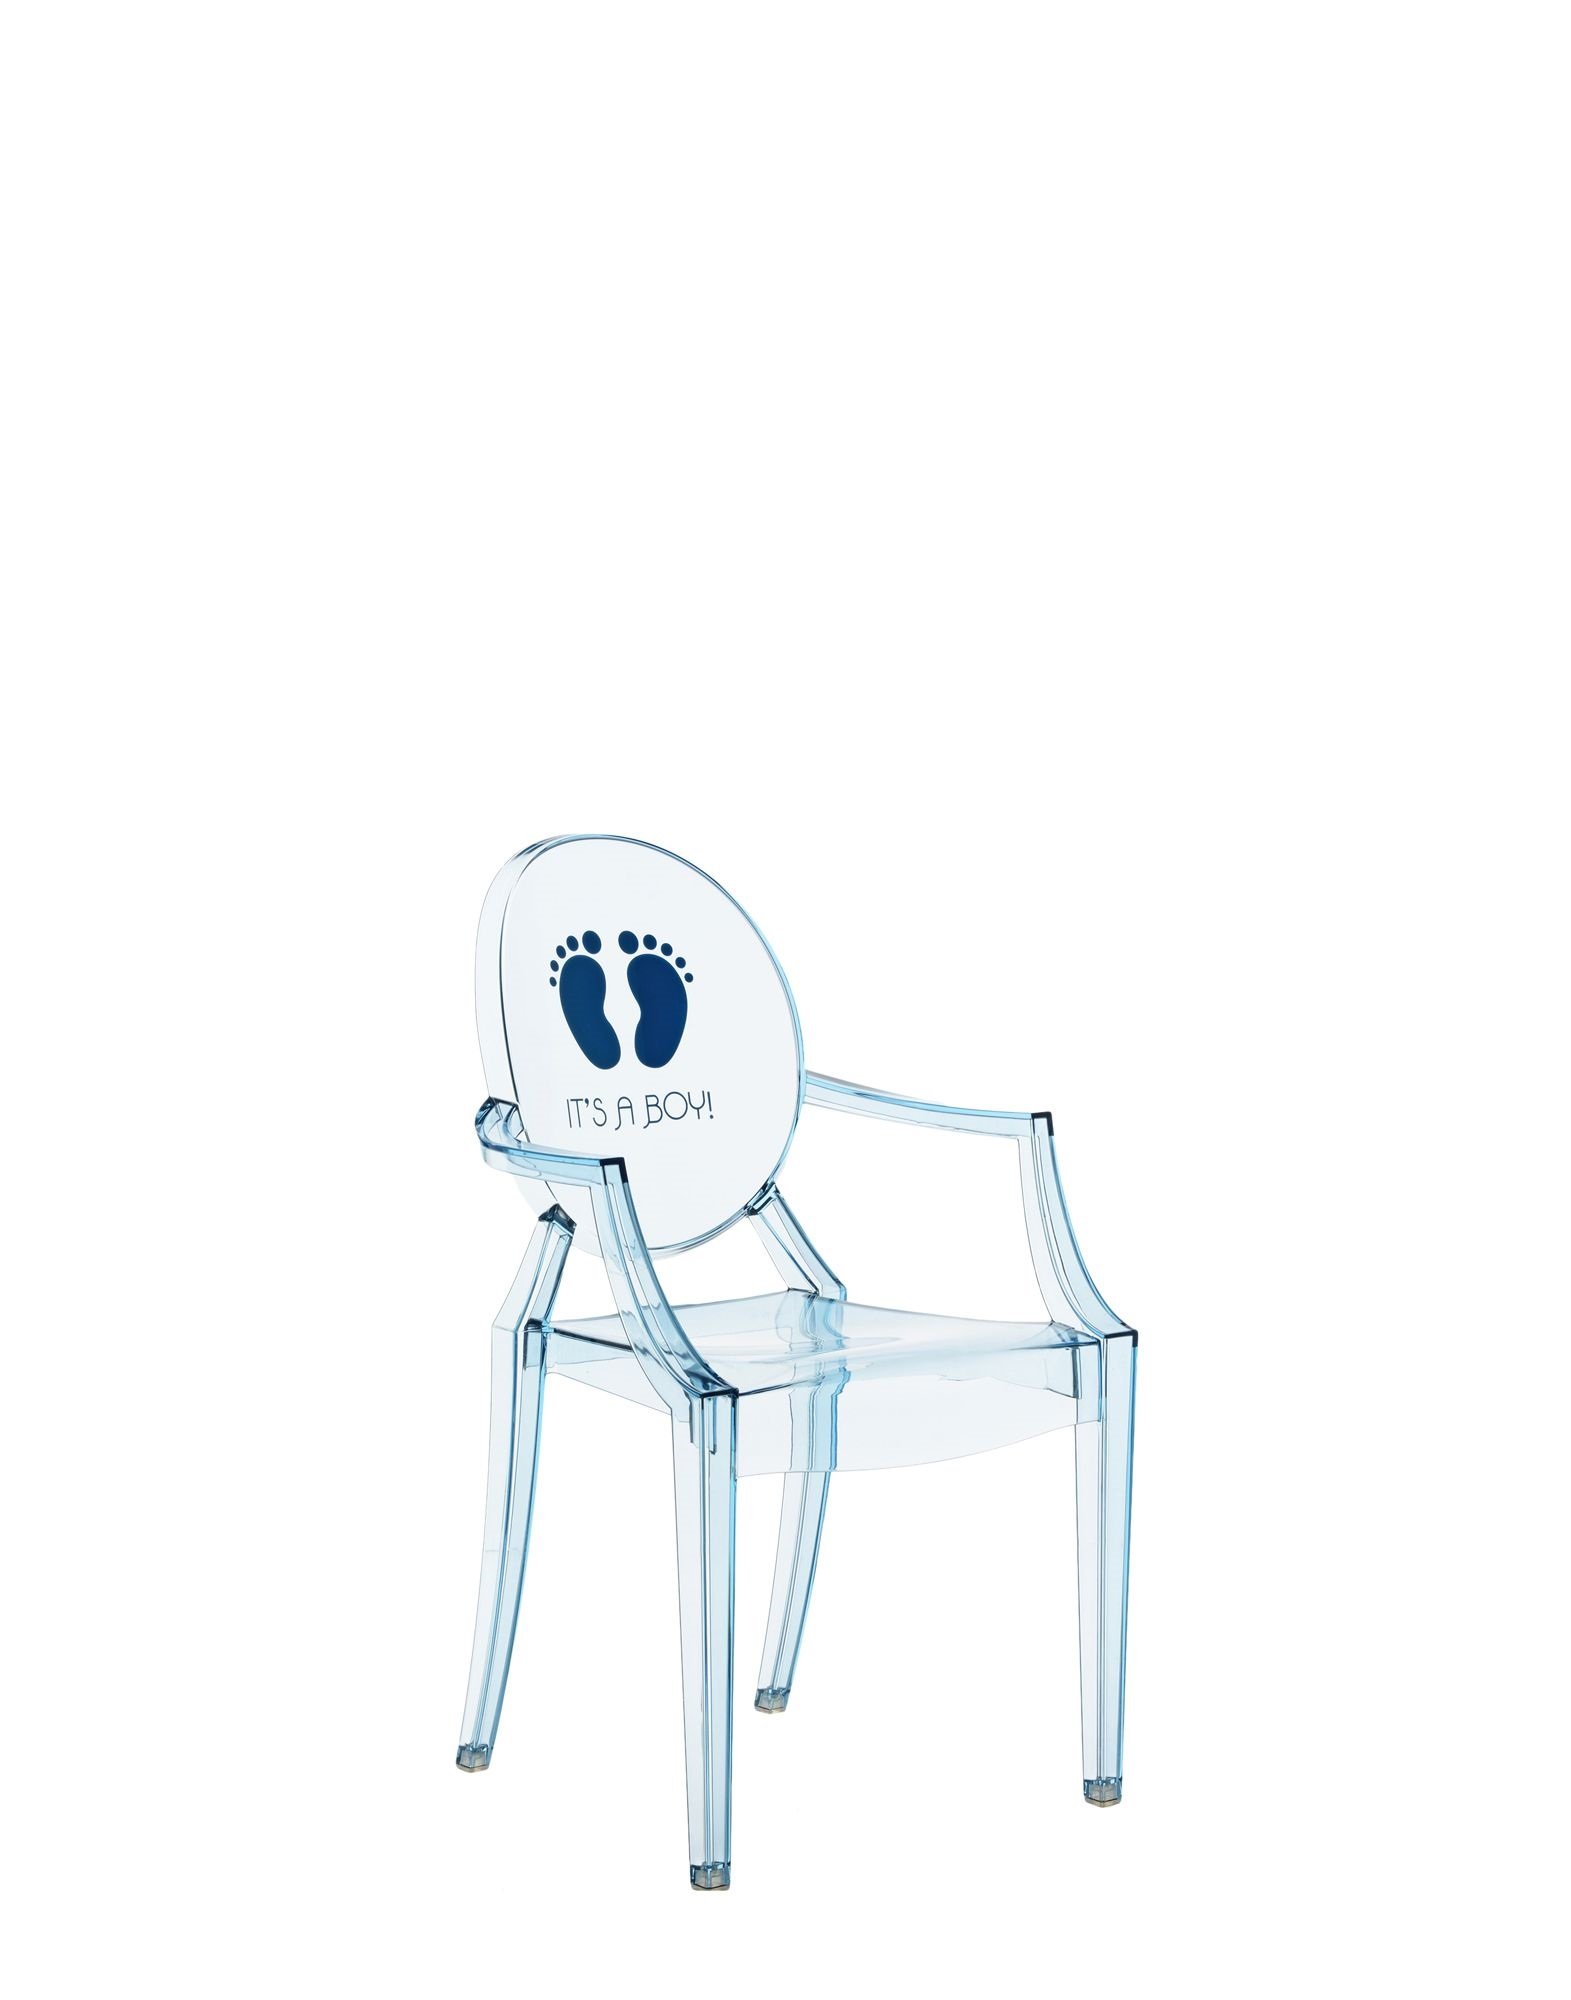 Lou Lou Ghost Special Edition Kids Chair from Kartell, designed by Philippe Starck